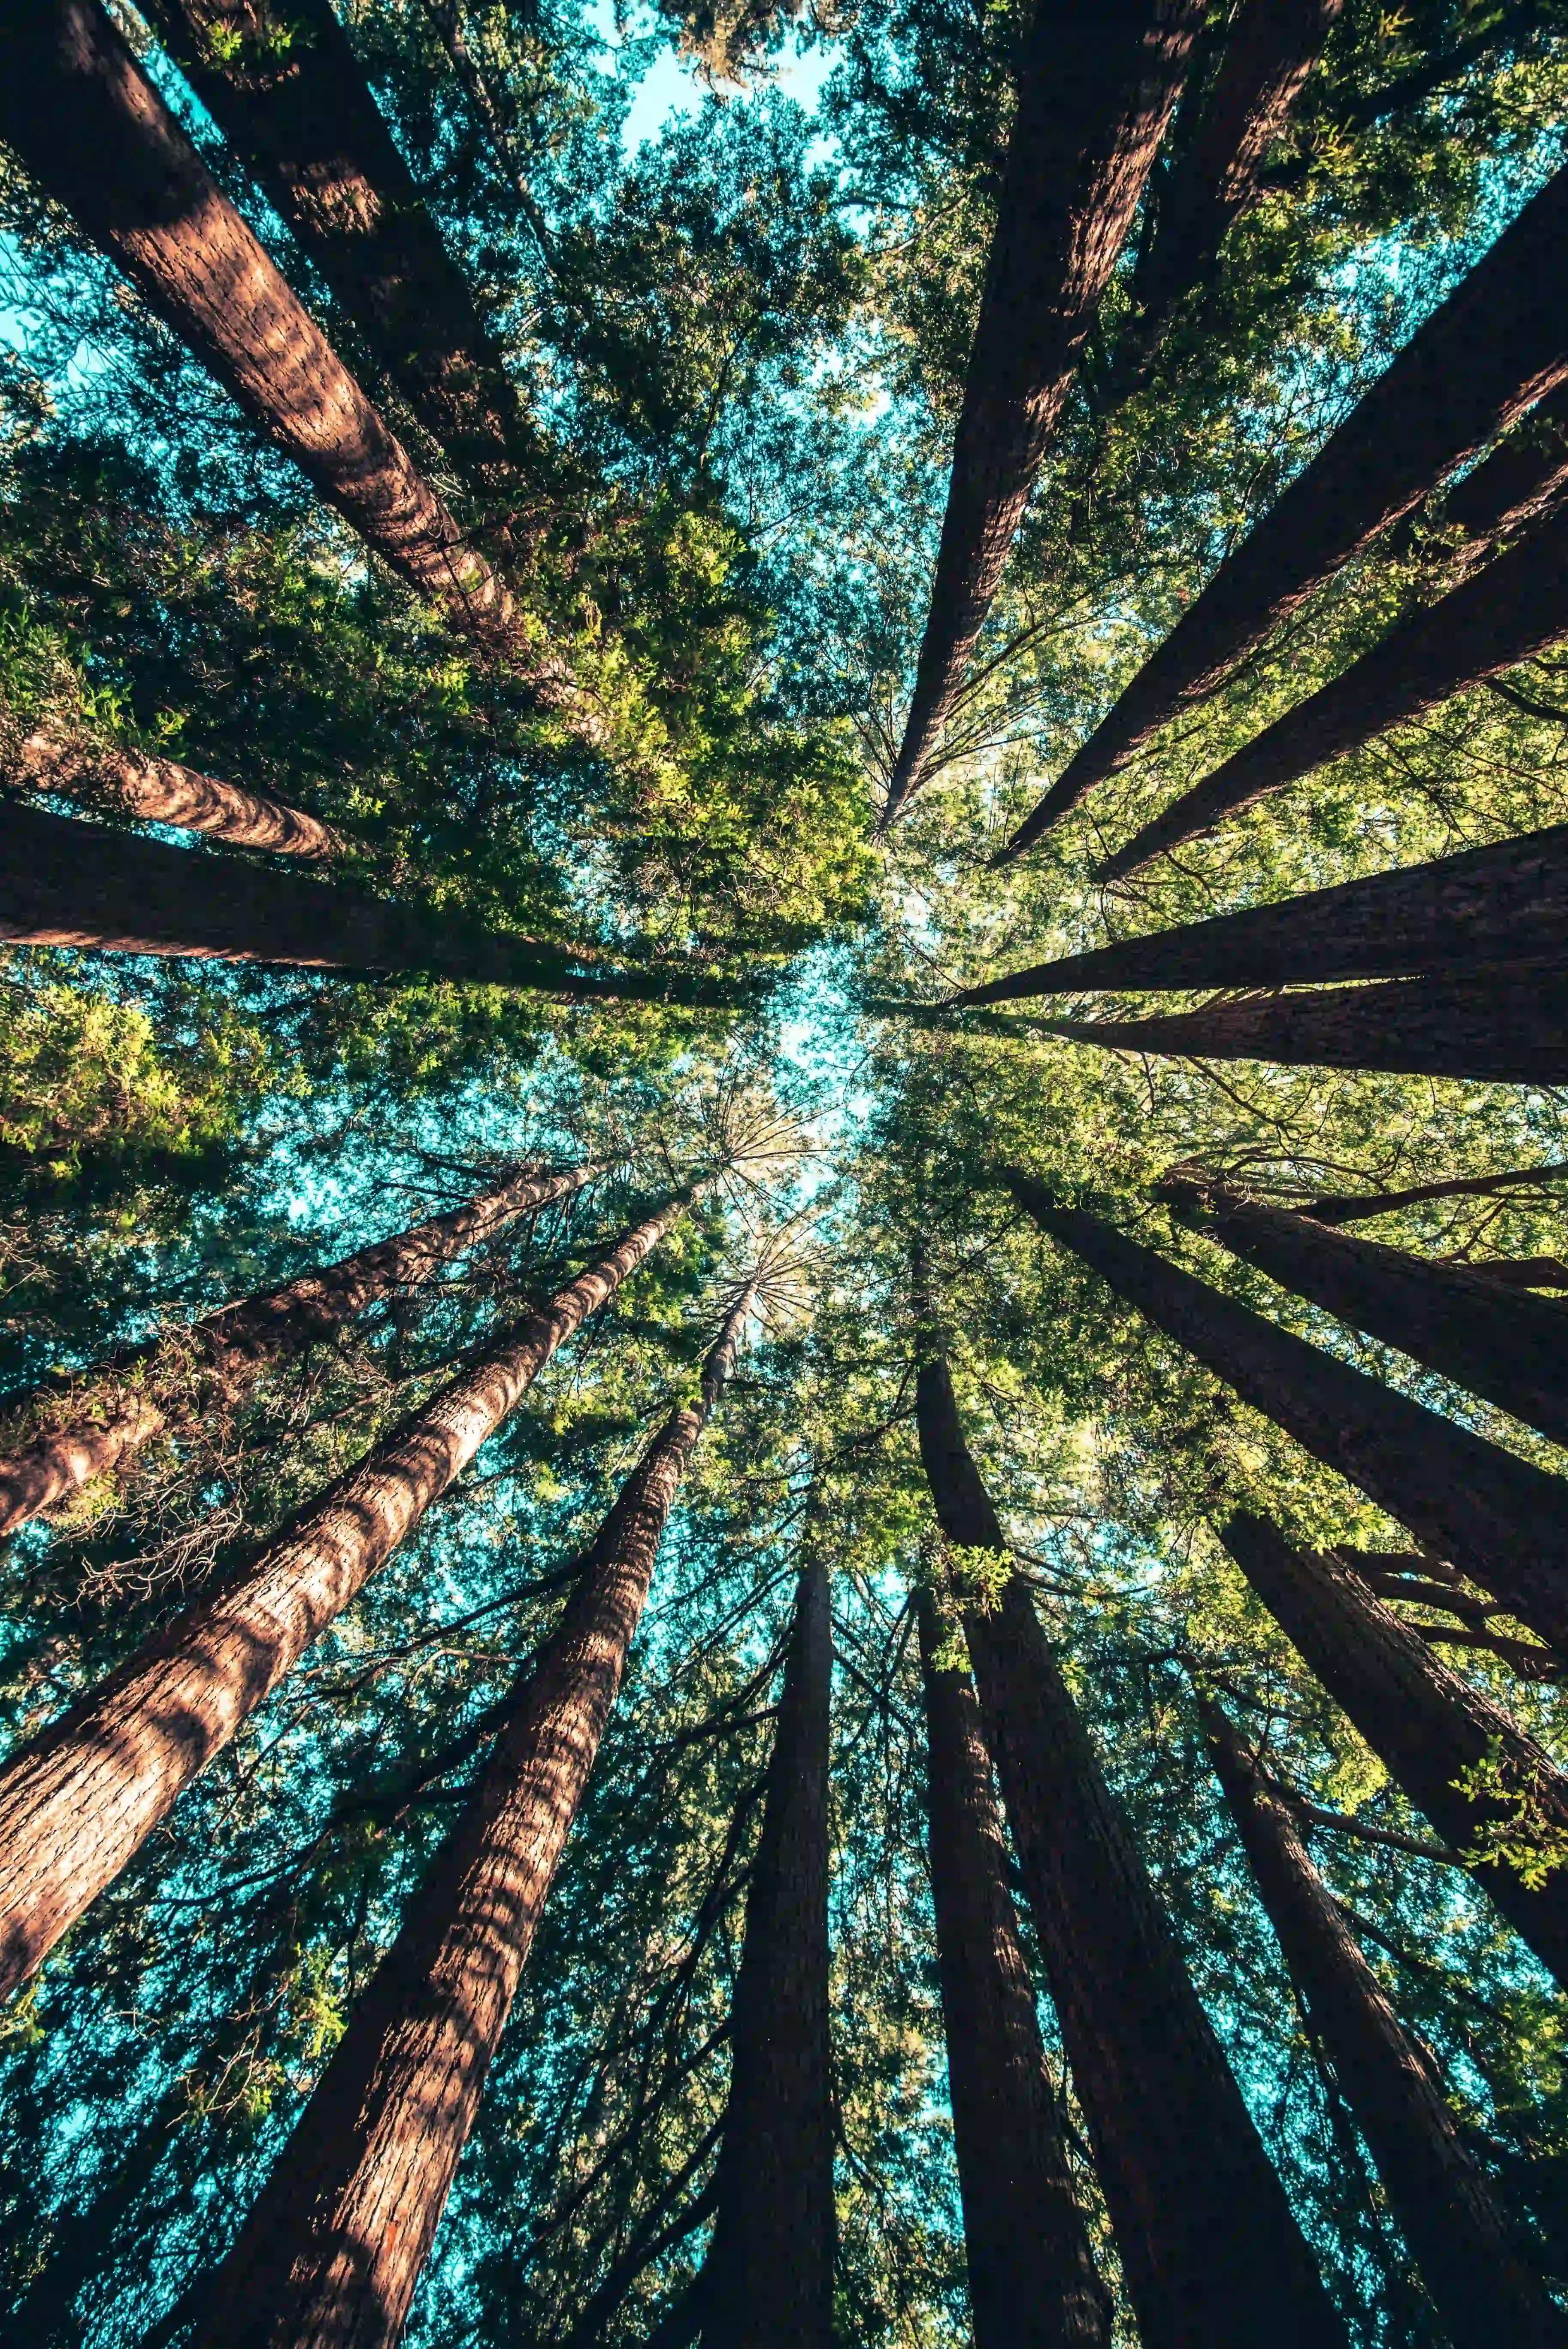 Roof of a forest from below